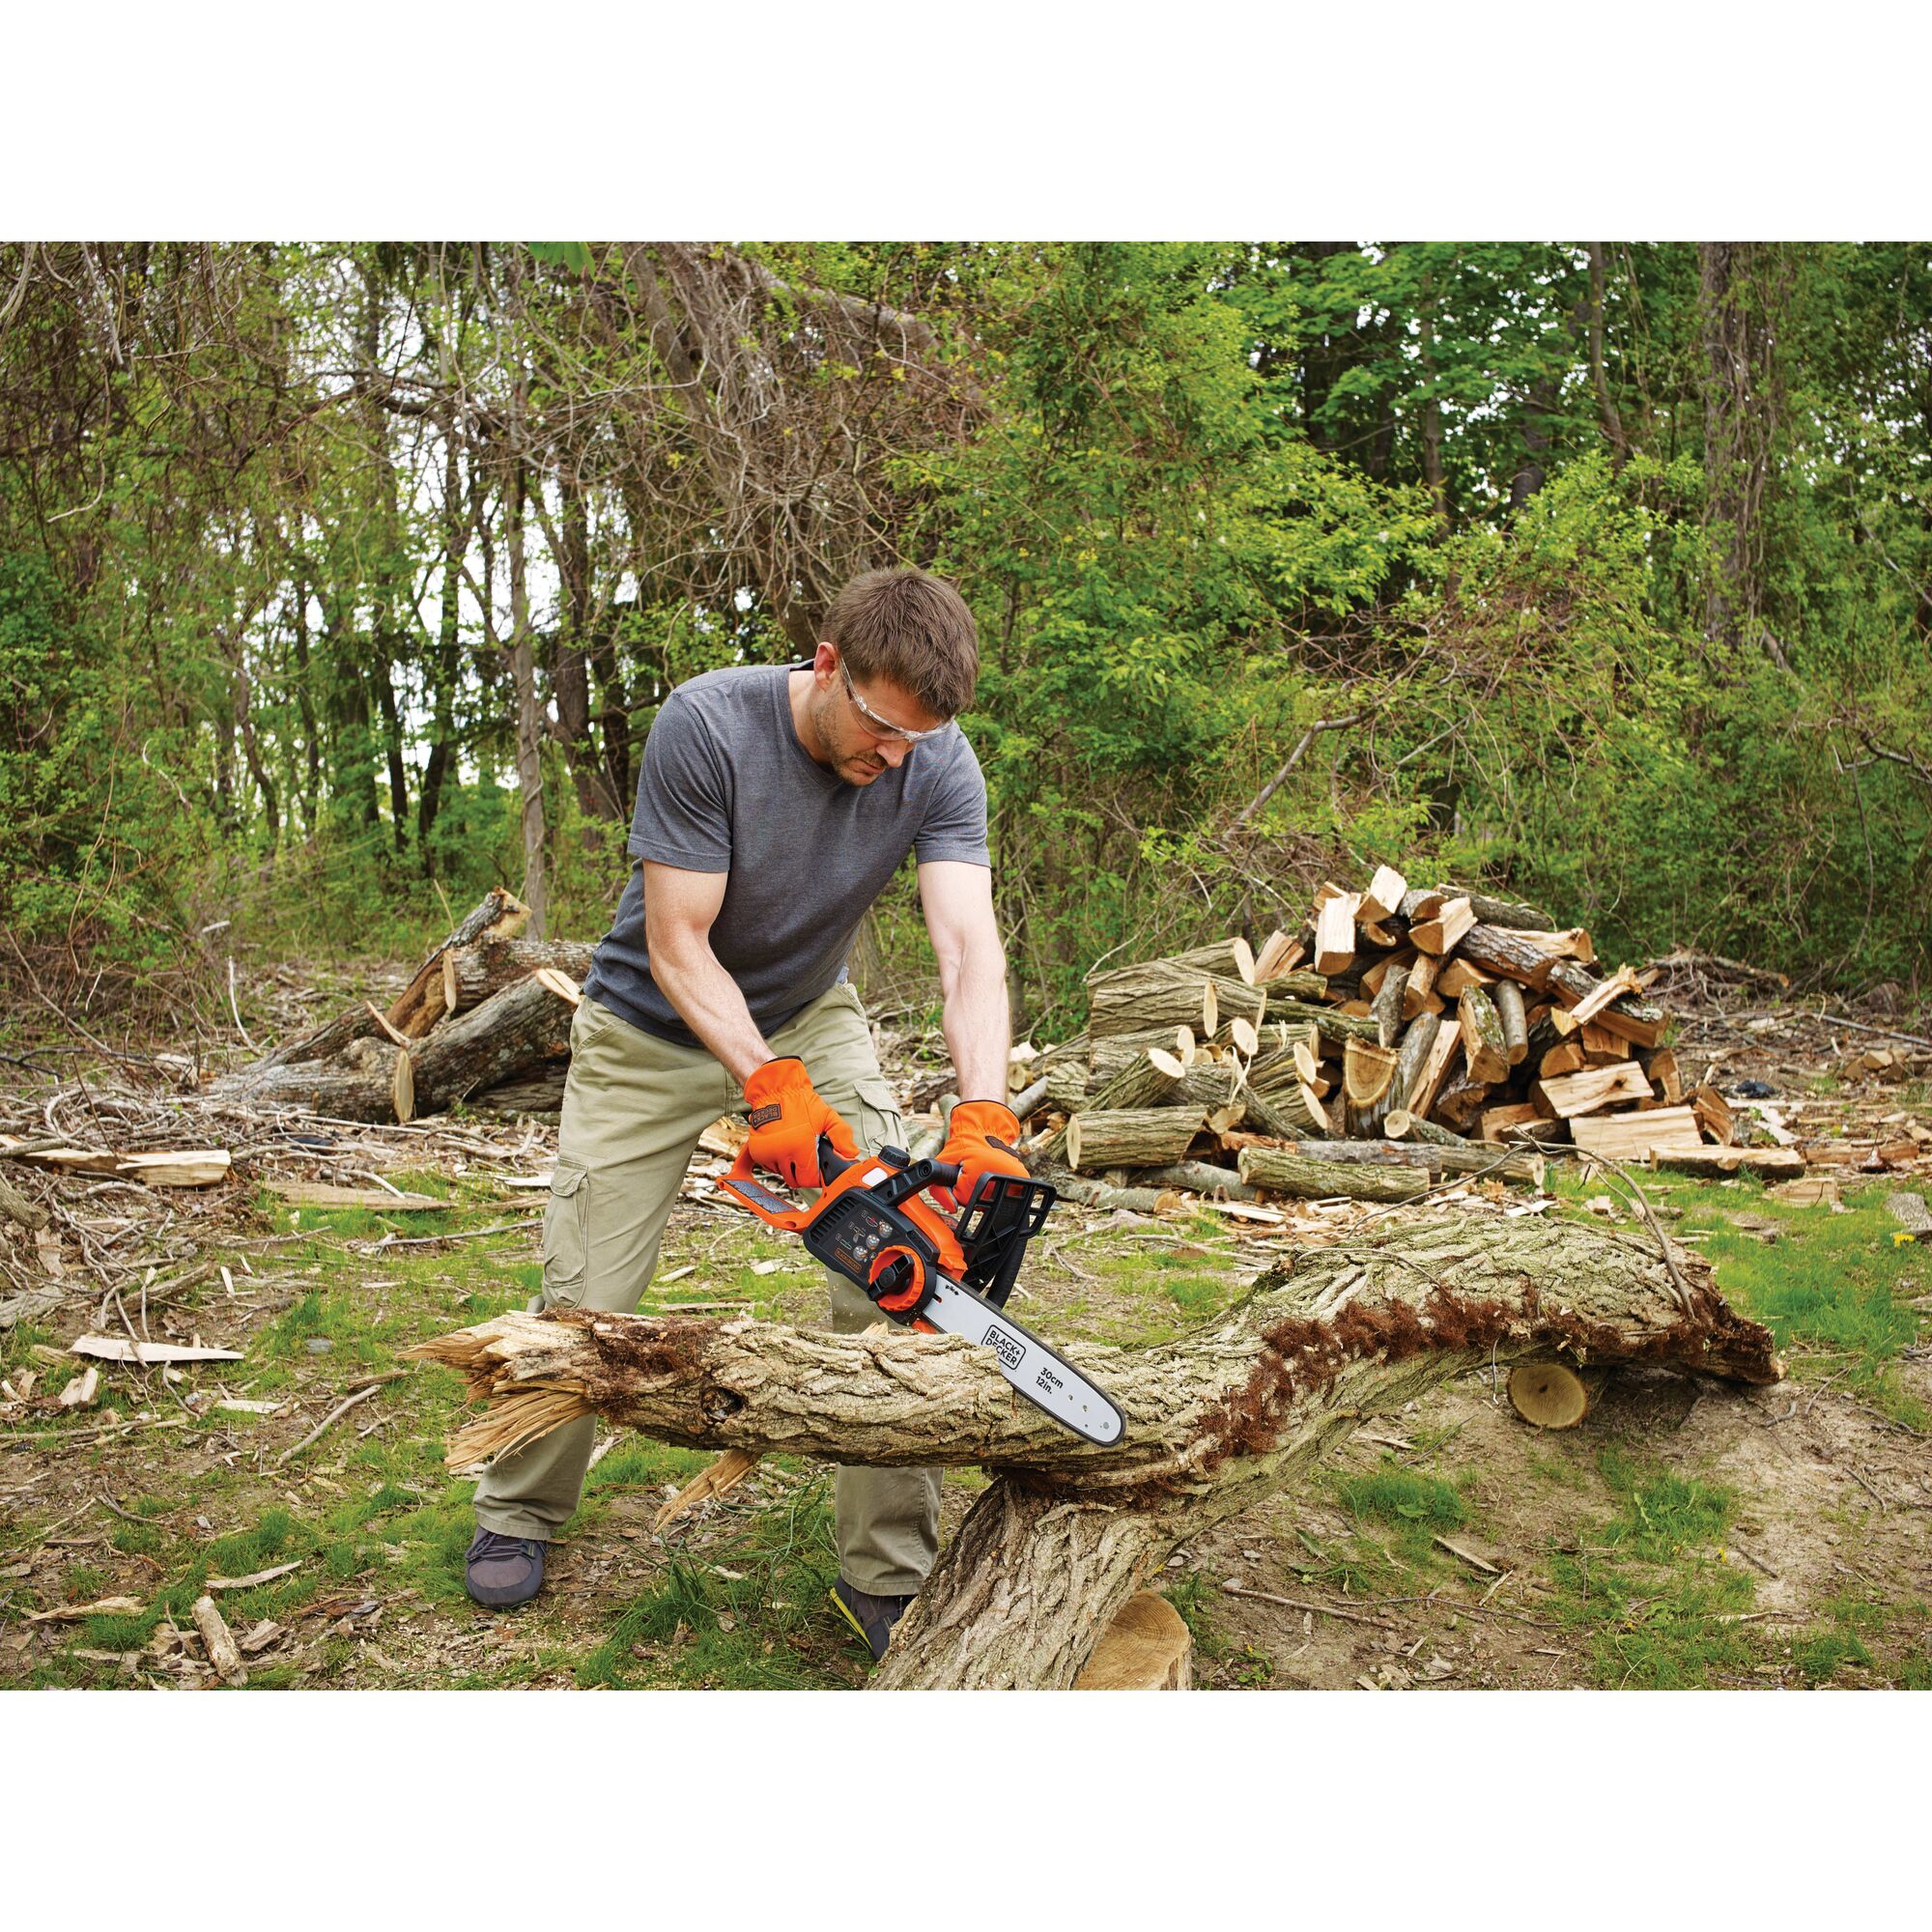 40 volt MAX lithium 12 inch chainsaw being used by a person to cut tree trunk.